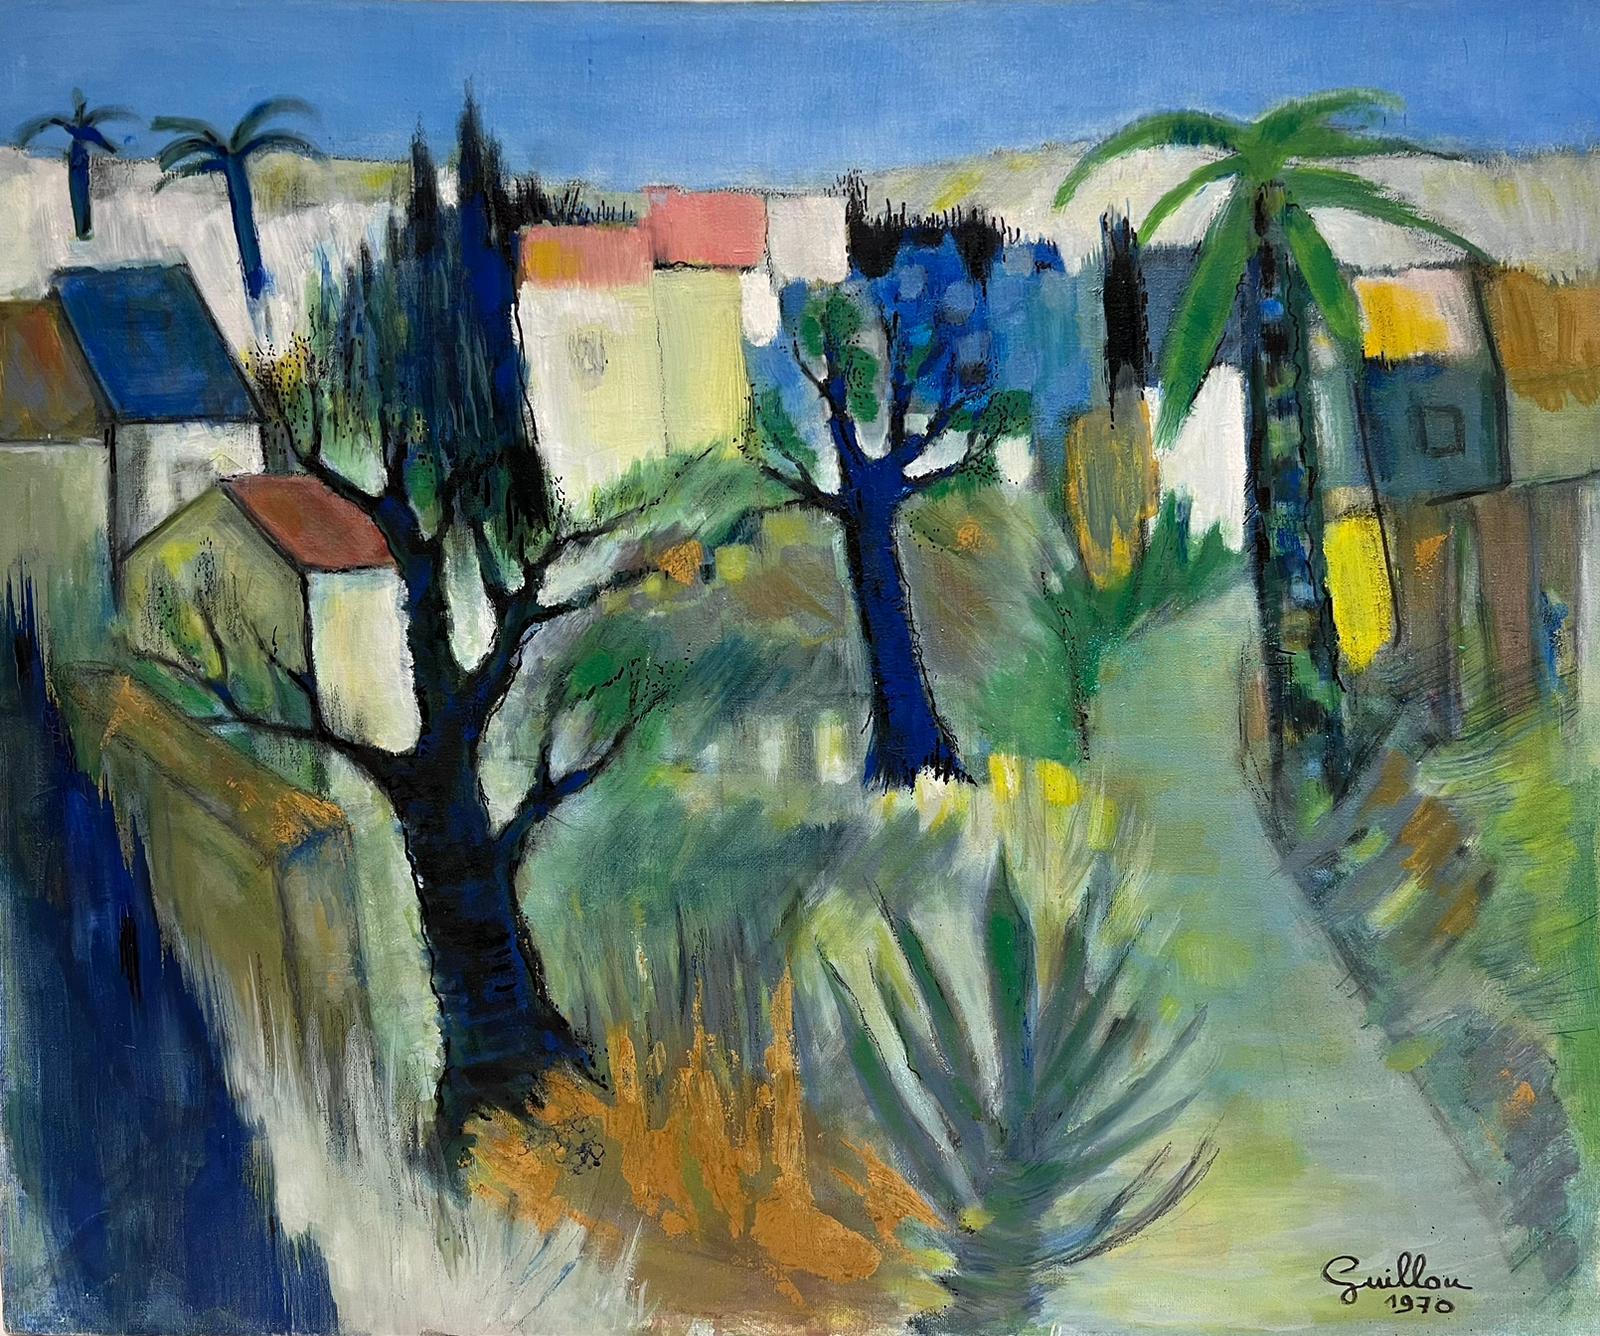 Andre Guillou Abstract Painting - 197's French Modernist Signed Oil Palm Trees in Village Landscape Large Painting